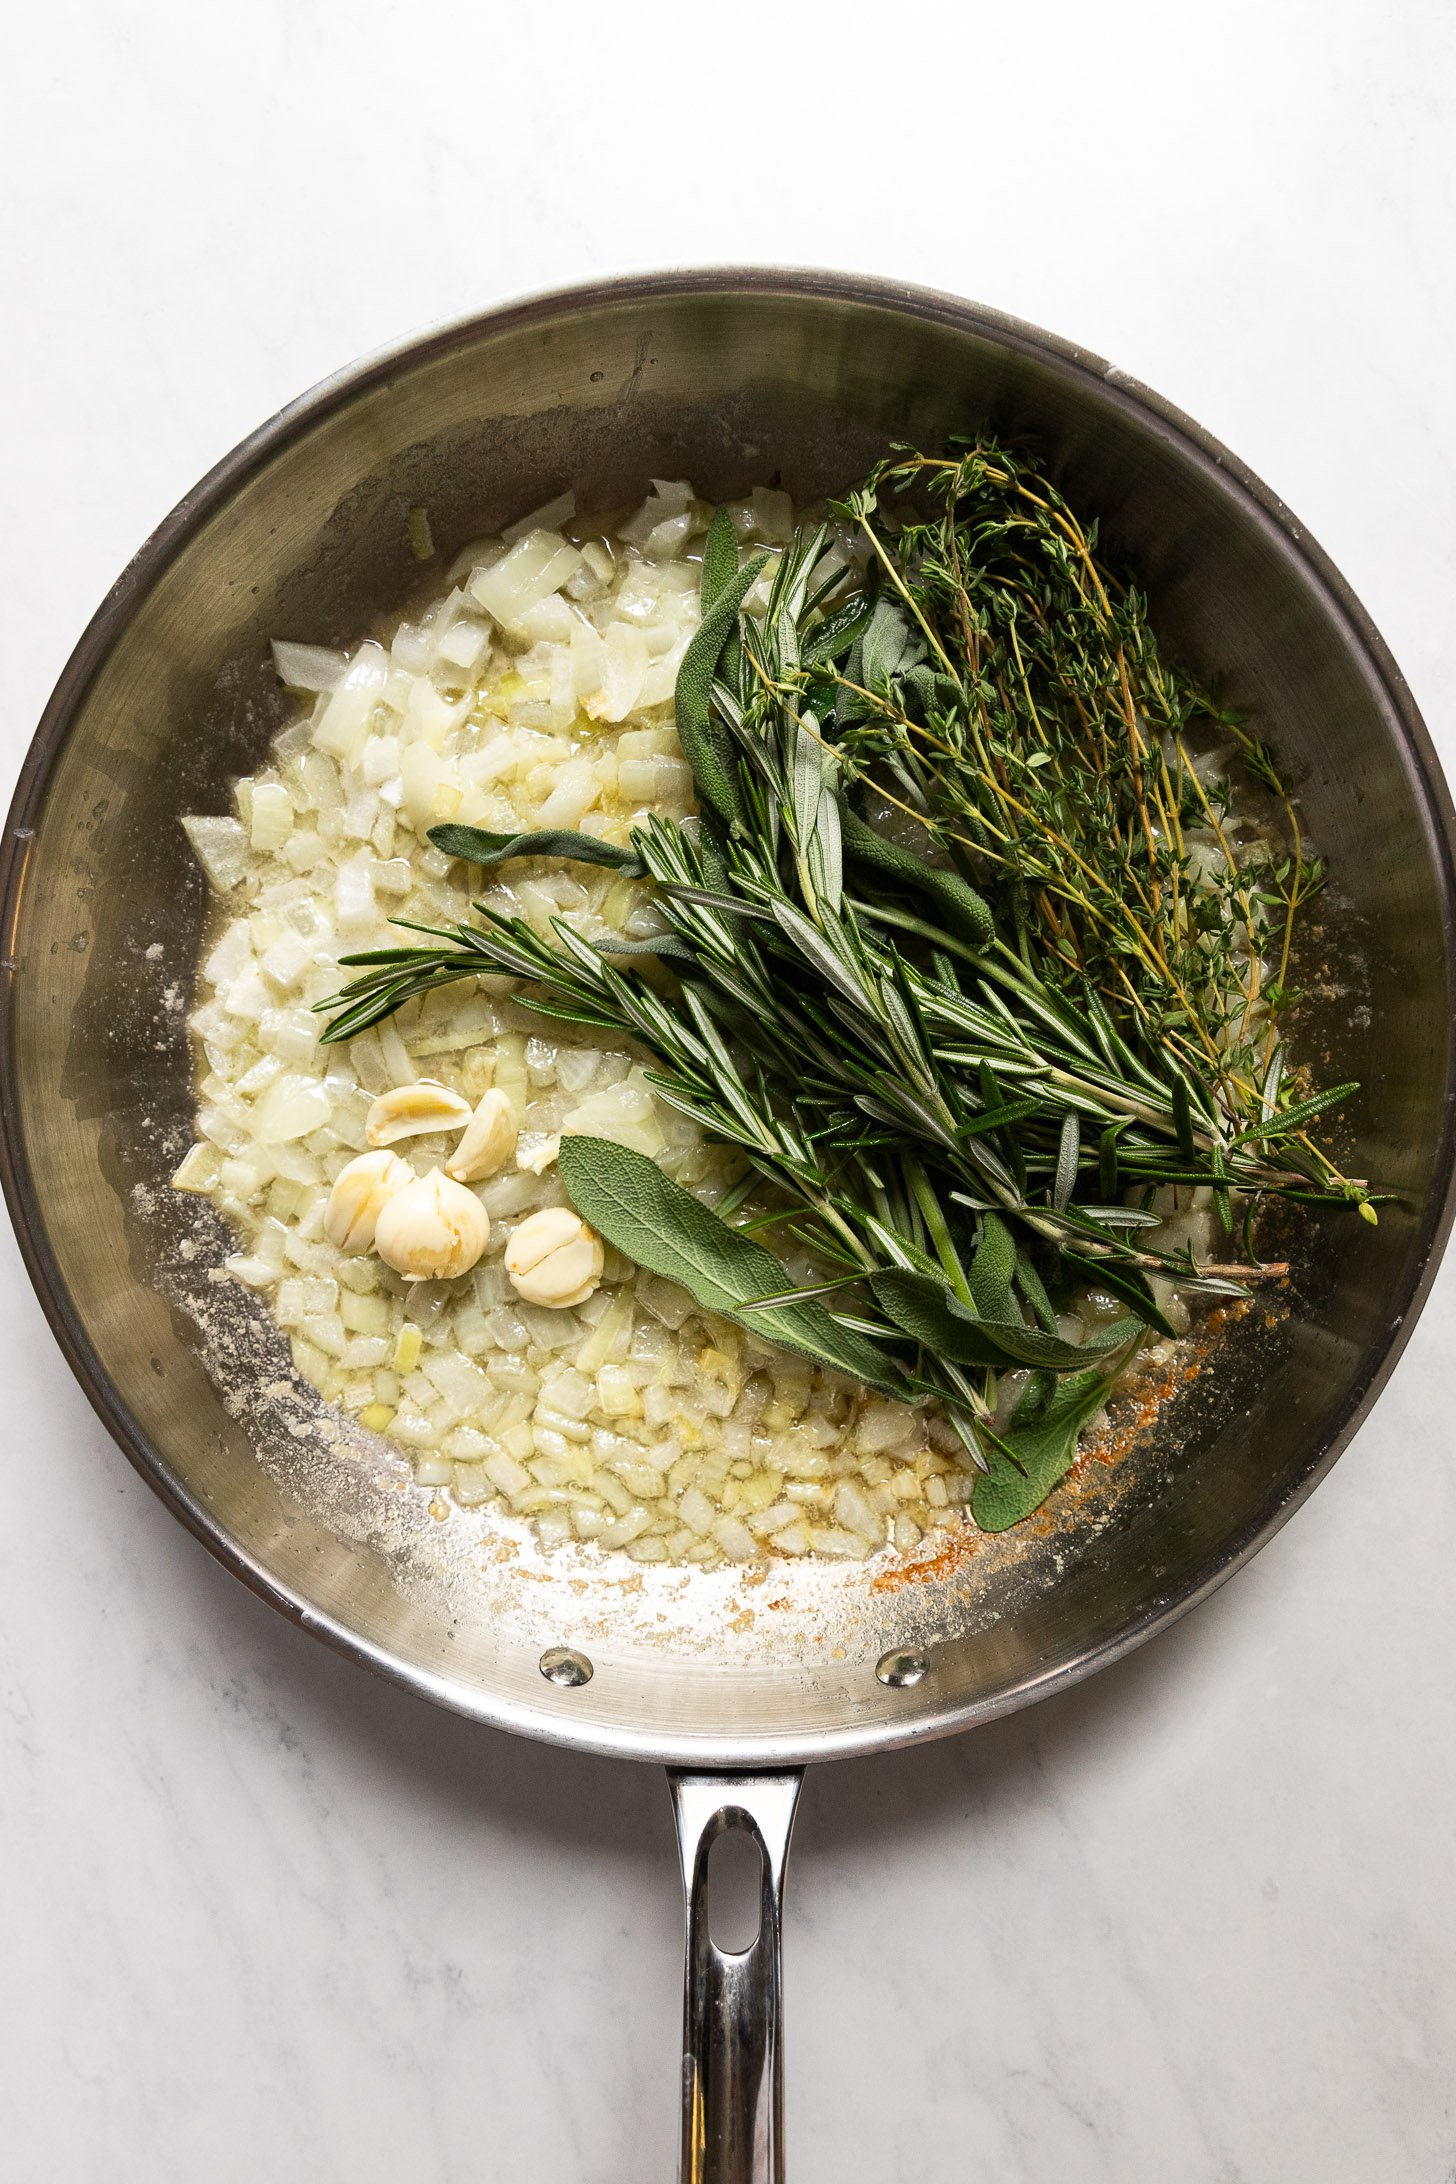 Sprigs of herbs and smashed garlic added to skillet.